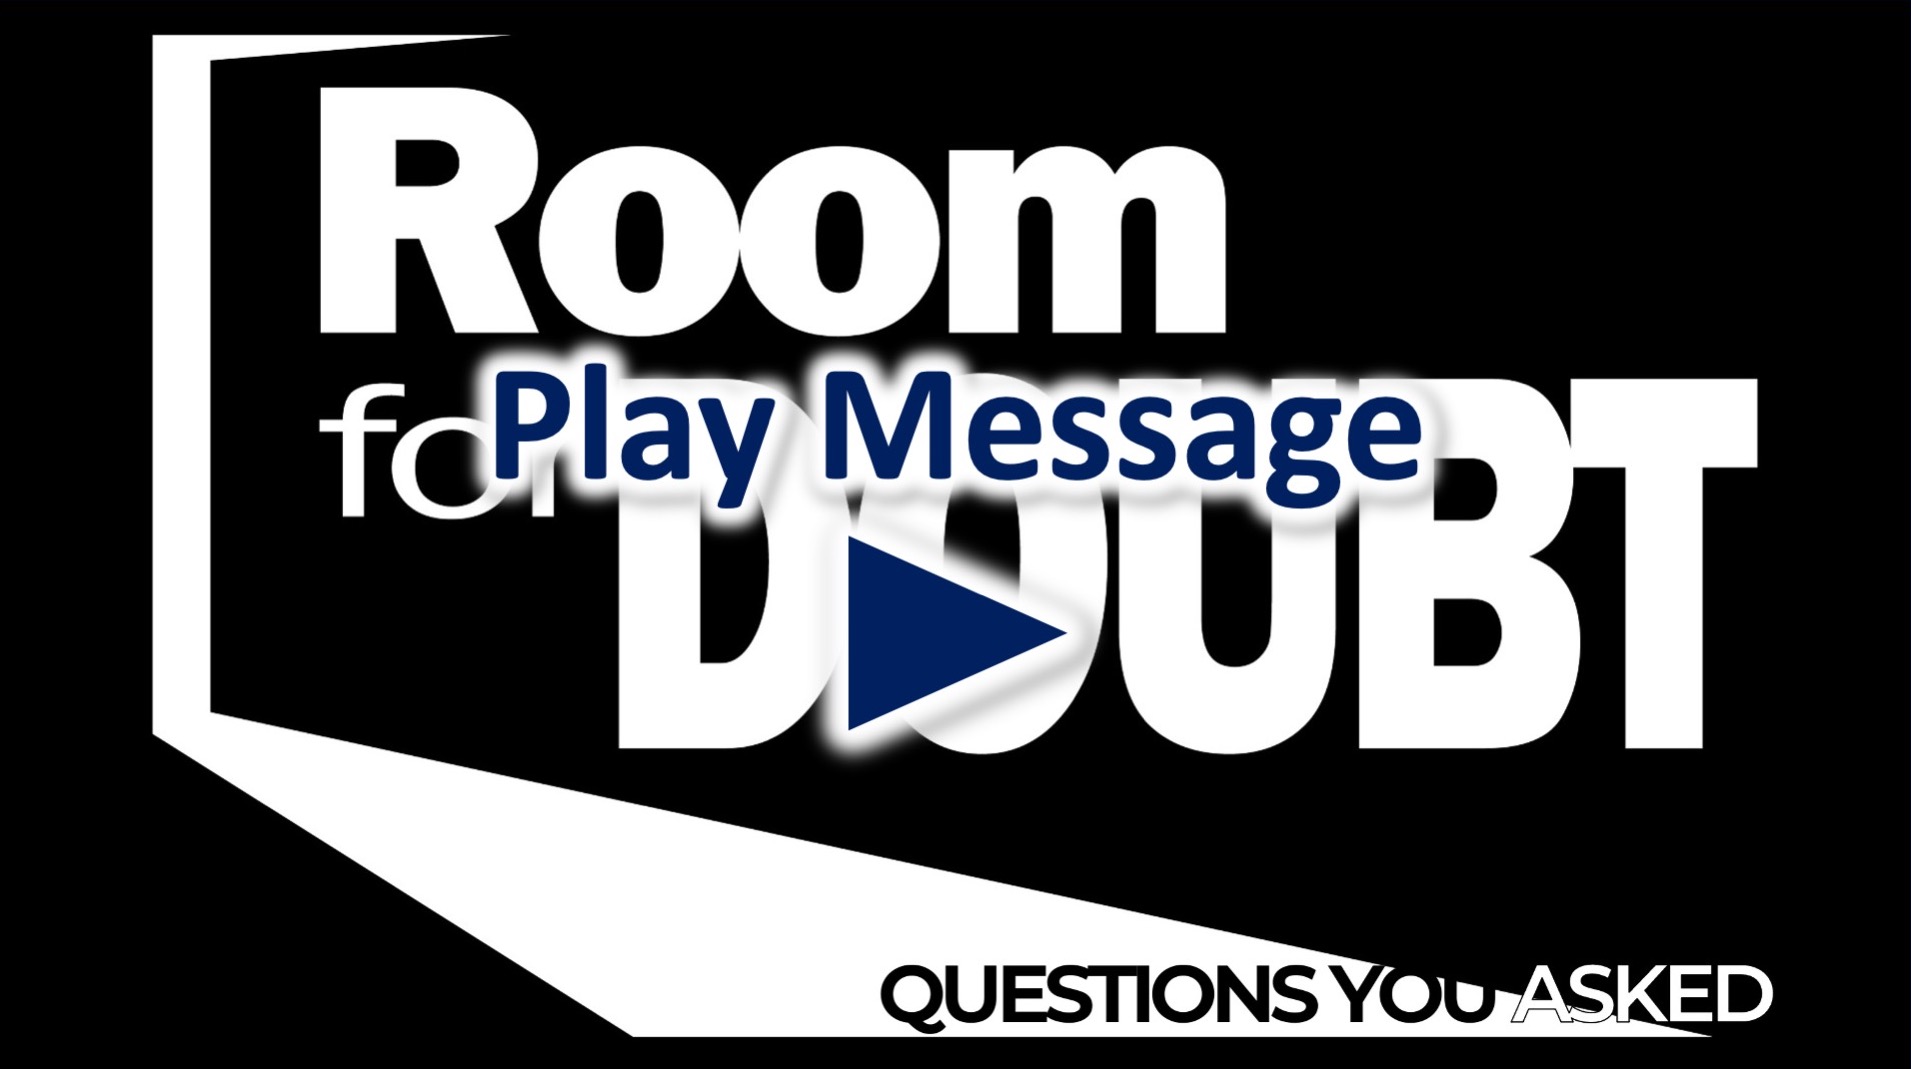 Room for Doubt: Questions You Asked